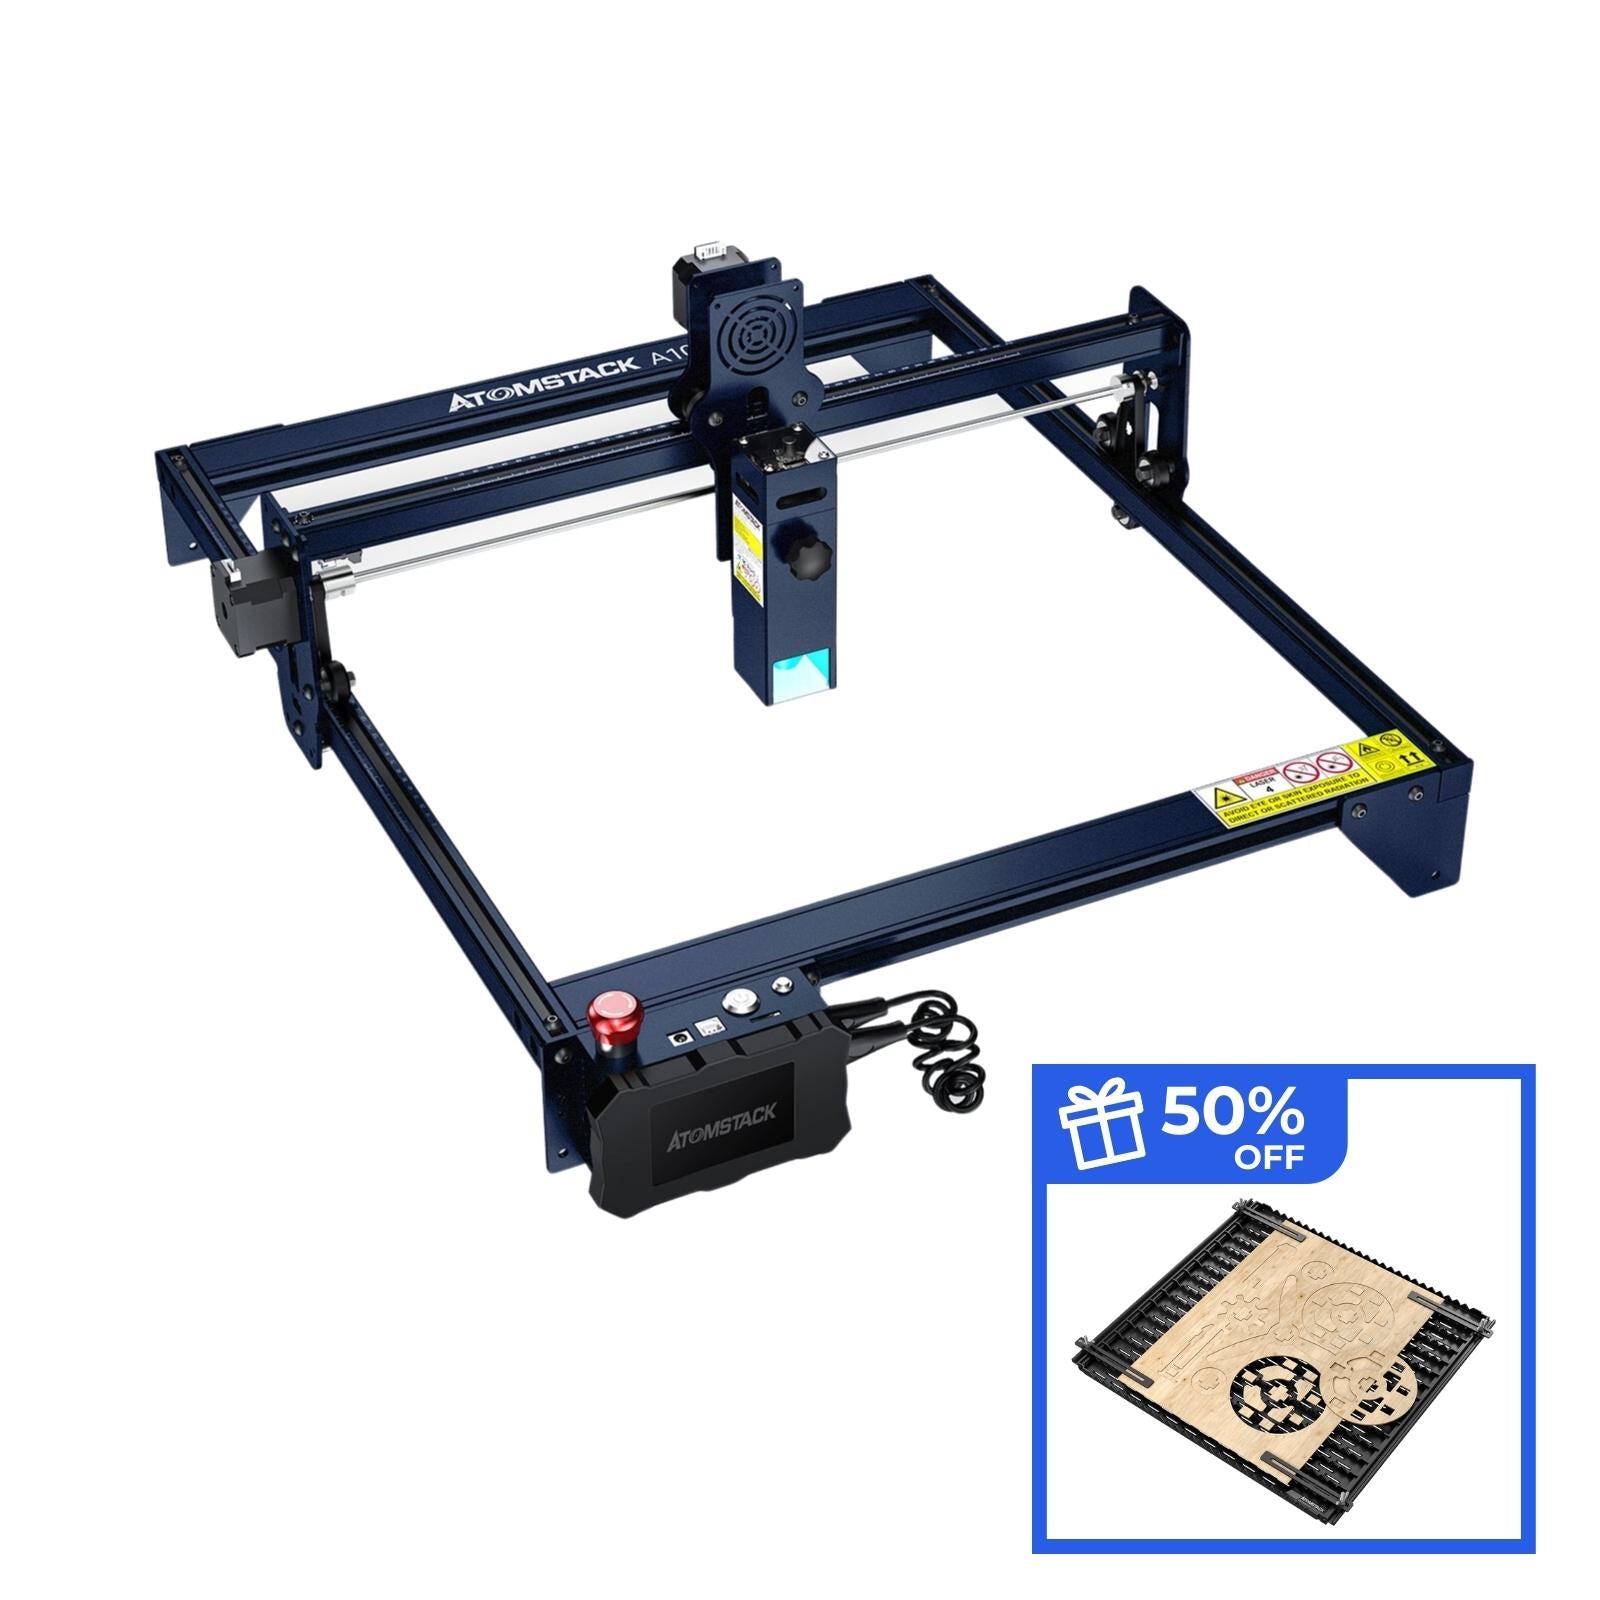 AtomStack A10 Pro Laser Engraver / Cutter 50W Offline With F30 Air Assist & F3 Matrix Panel